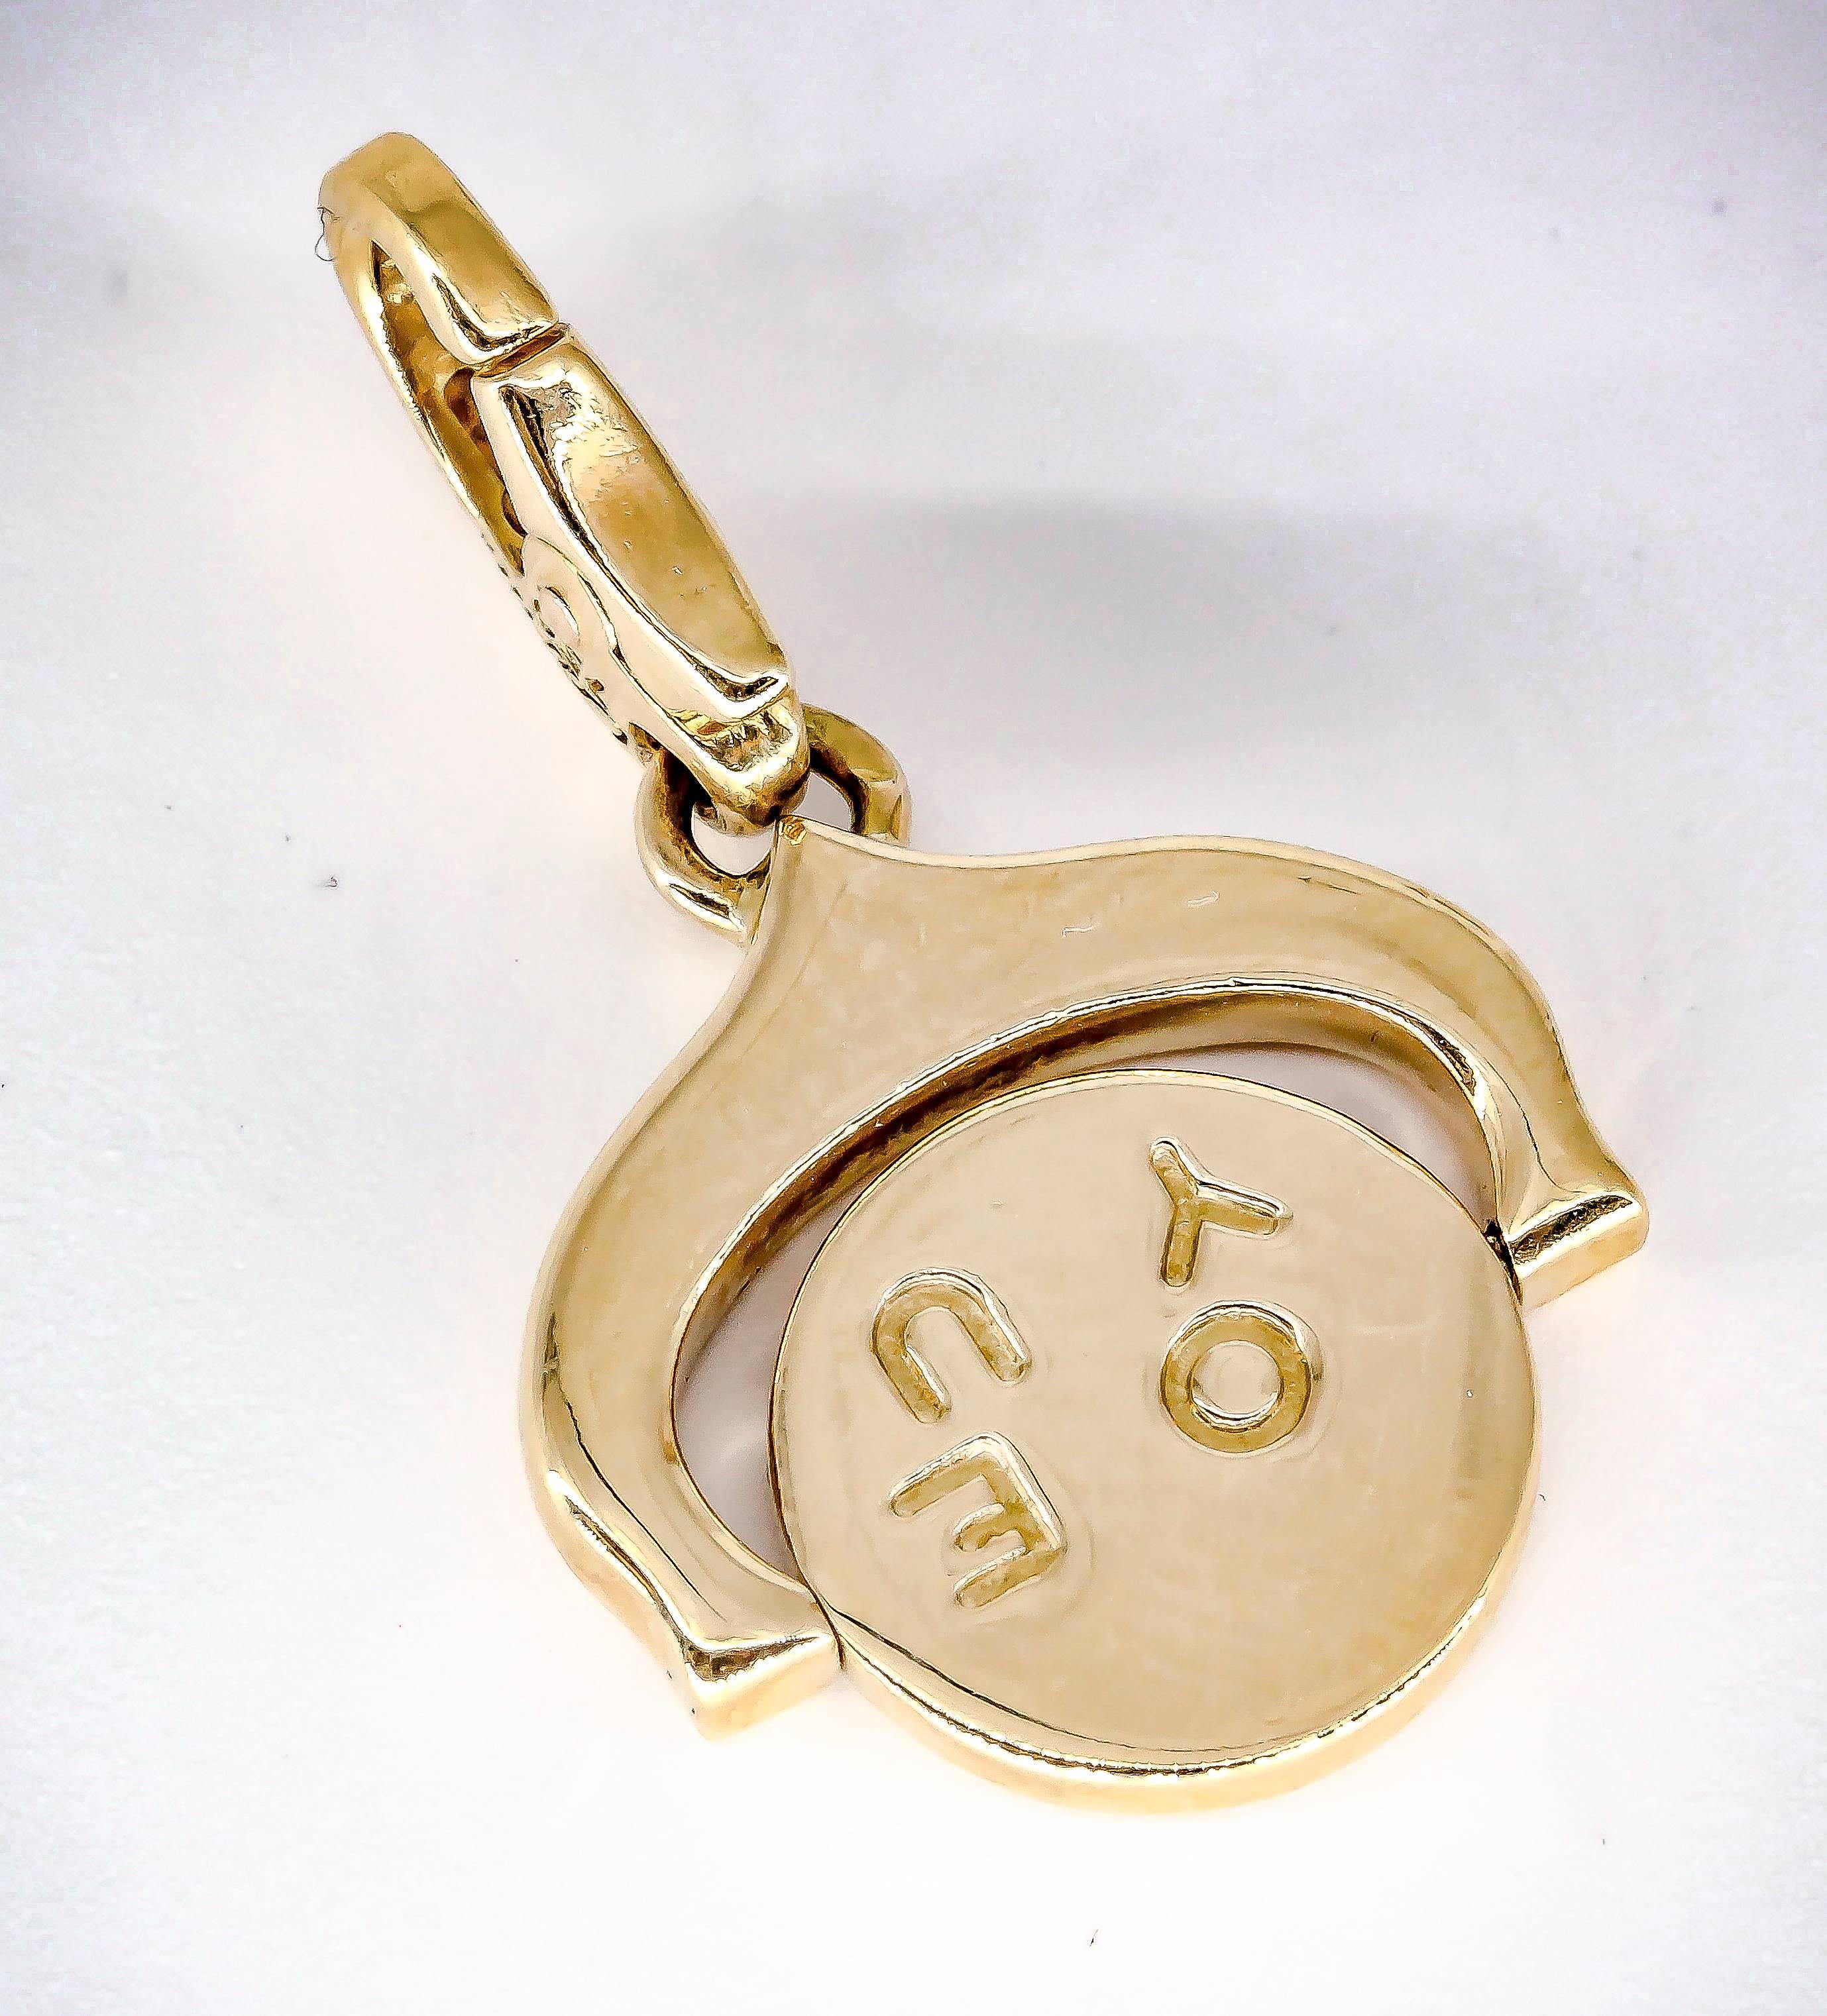 Interesting 18K yellow gold charm by Cartier. It has a revolving circle that when spun reads 